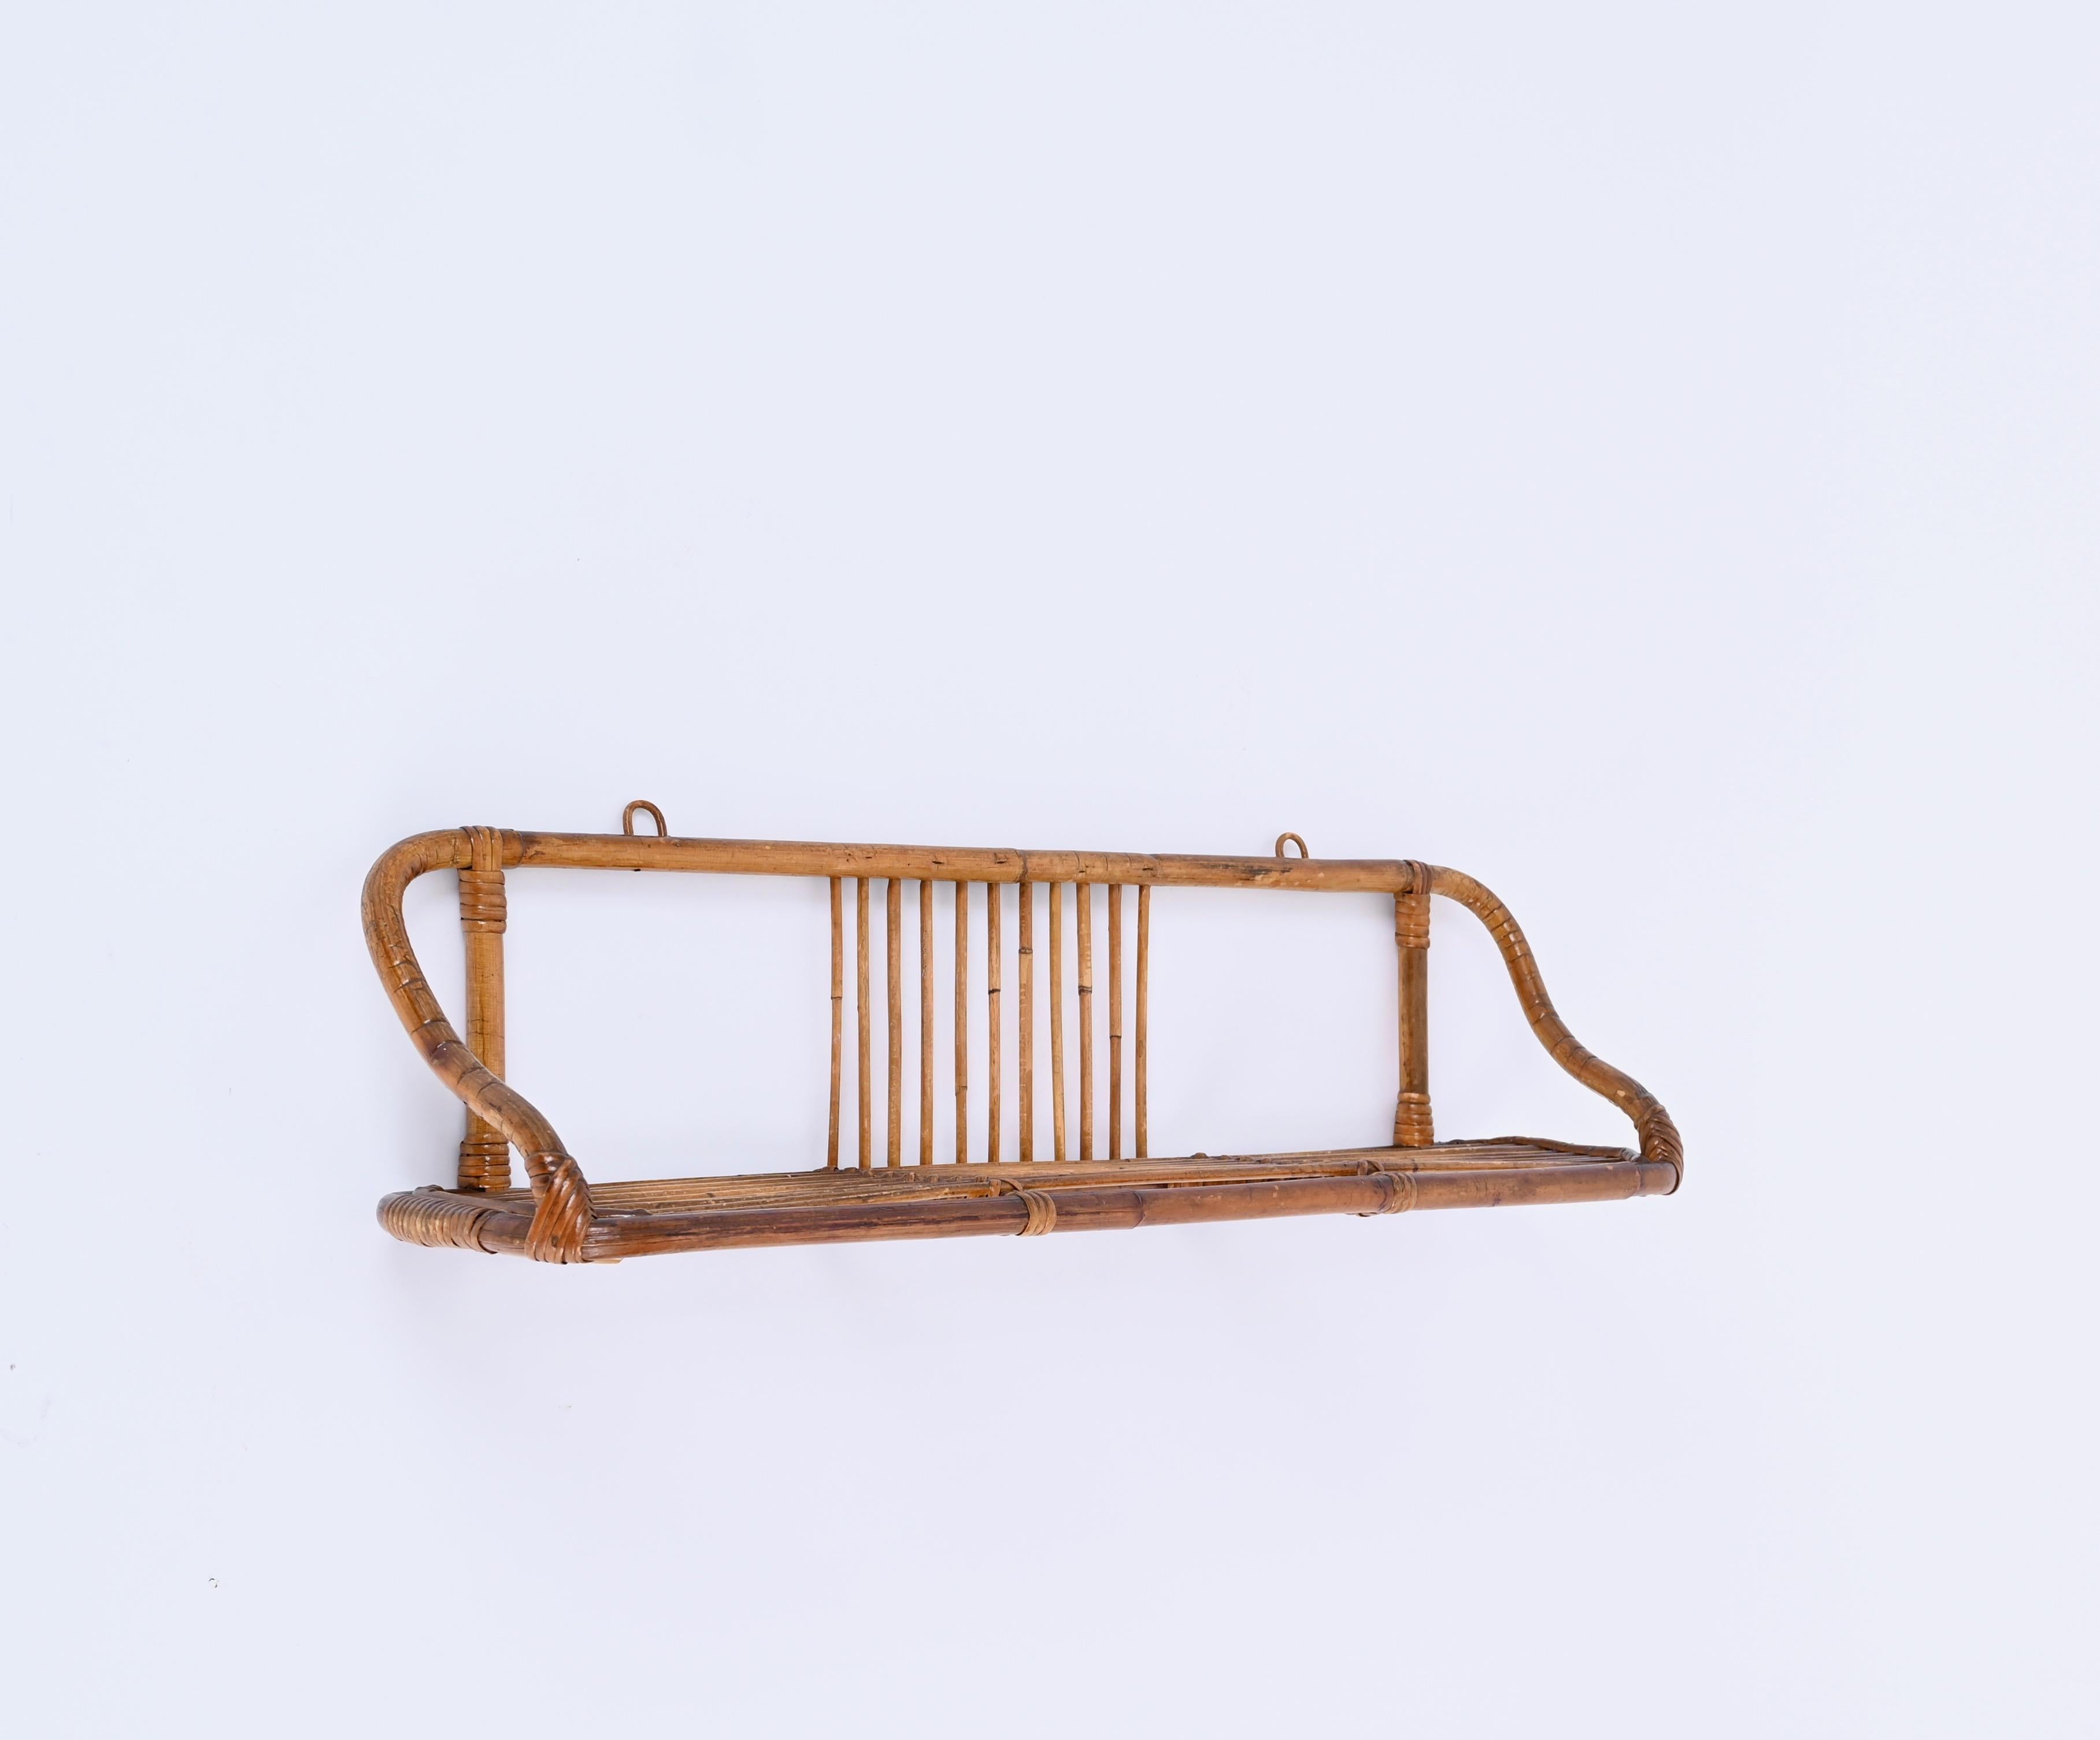  French Riviera Mid-Century Wall Shelf in Rattan and Bamboo, Italy, 1960s For Sale 3